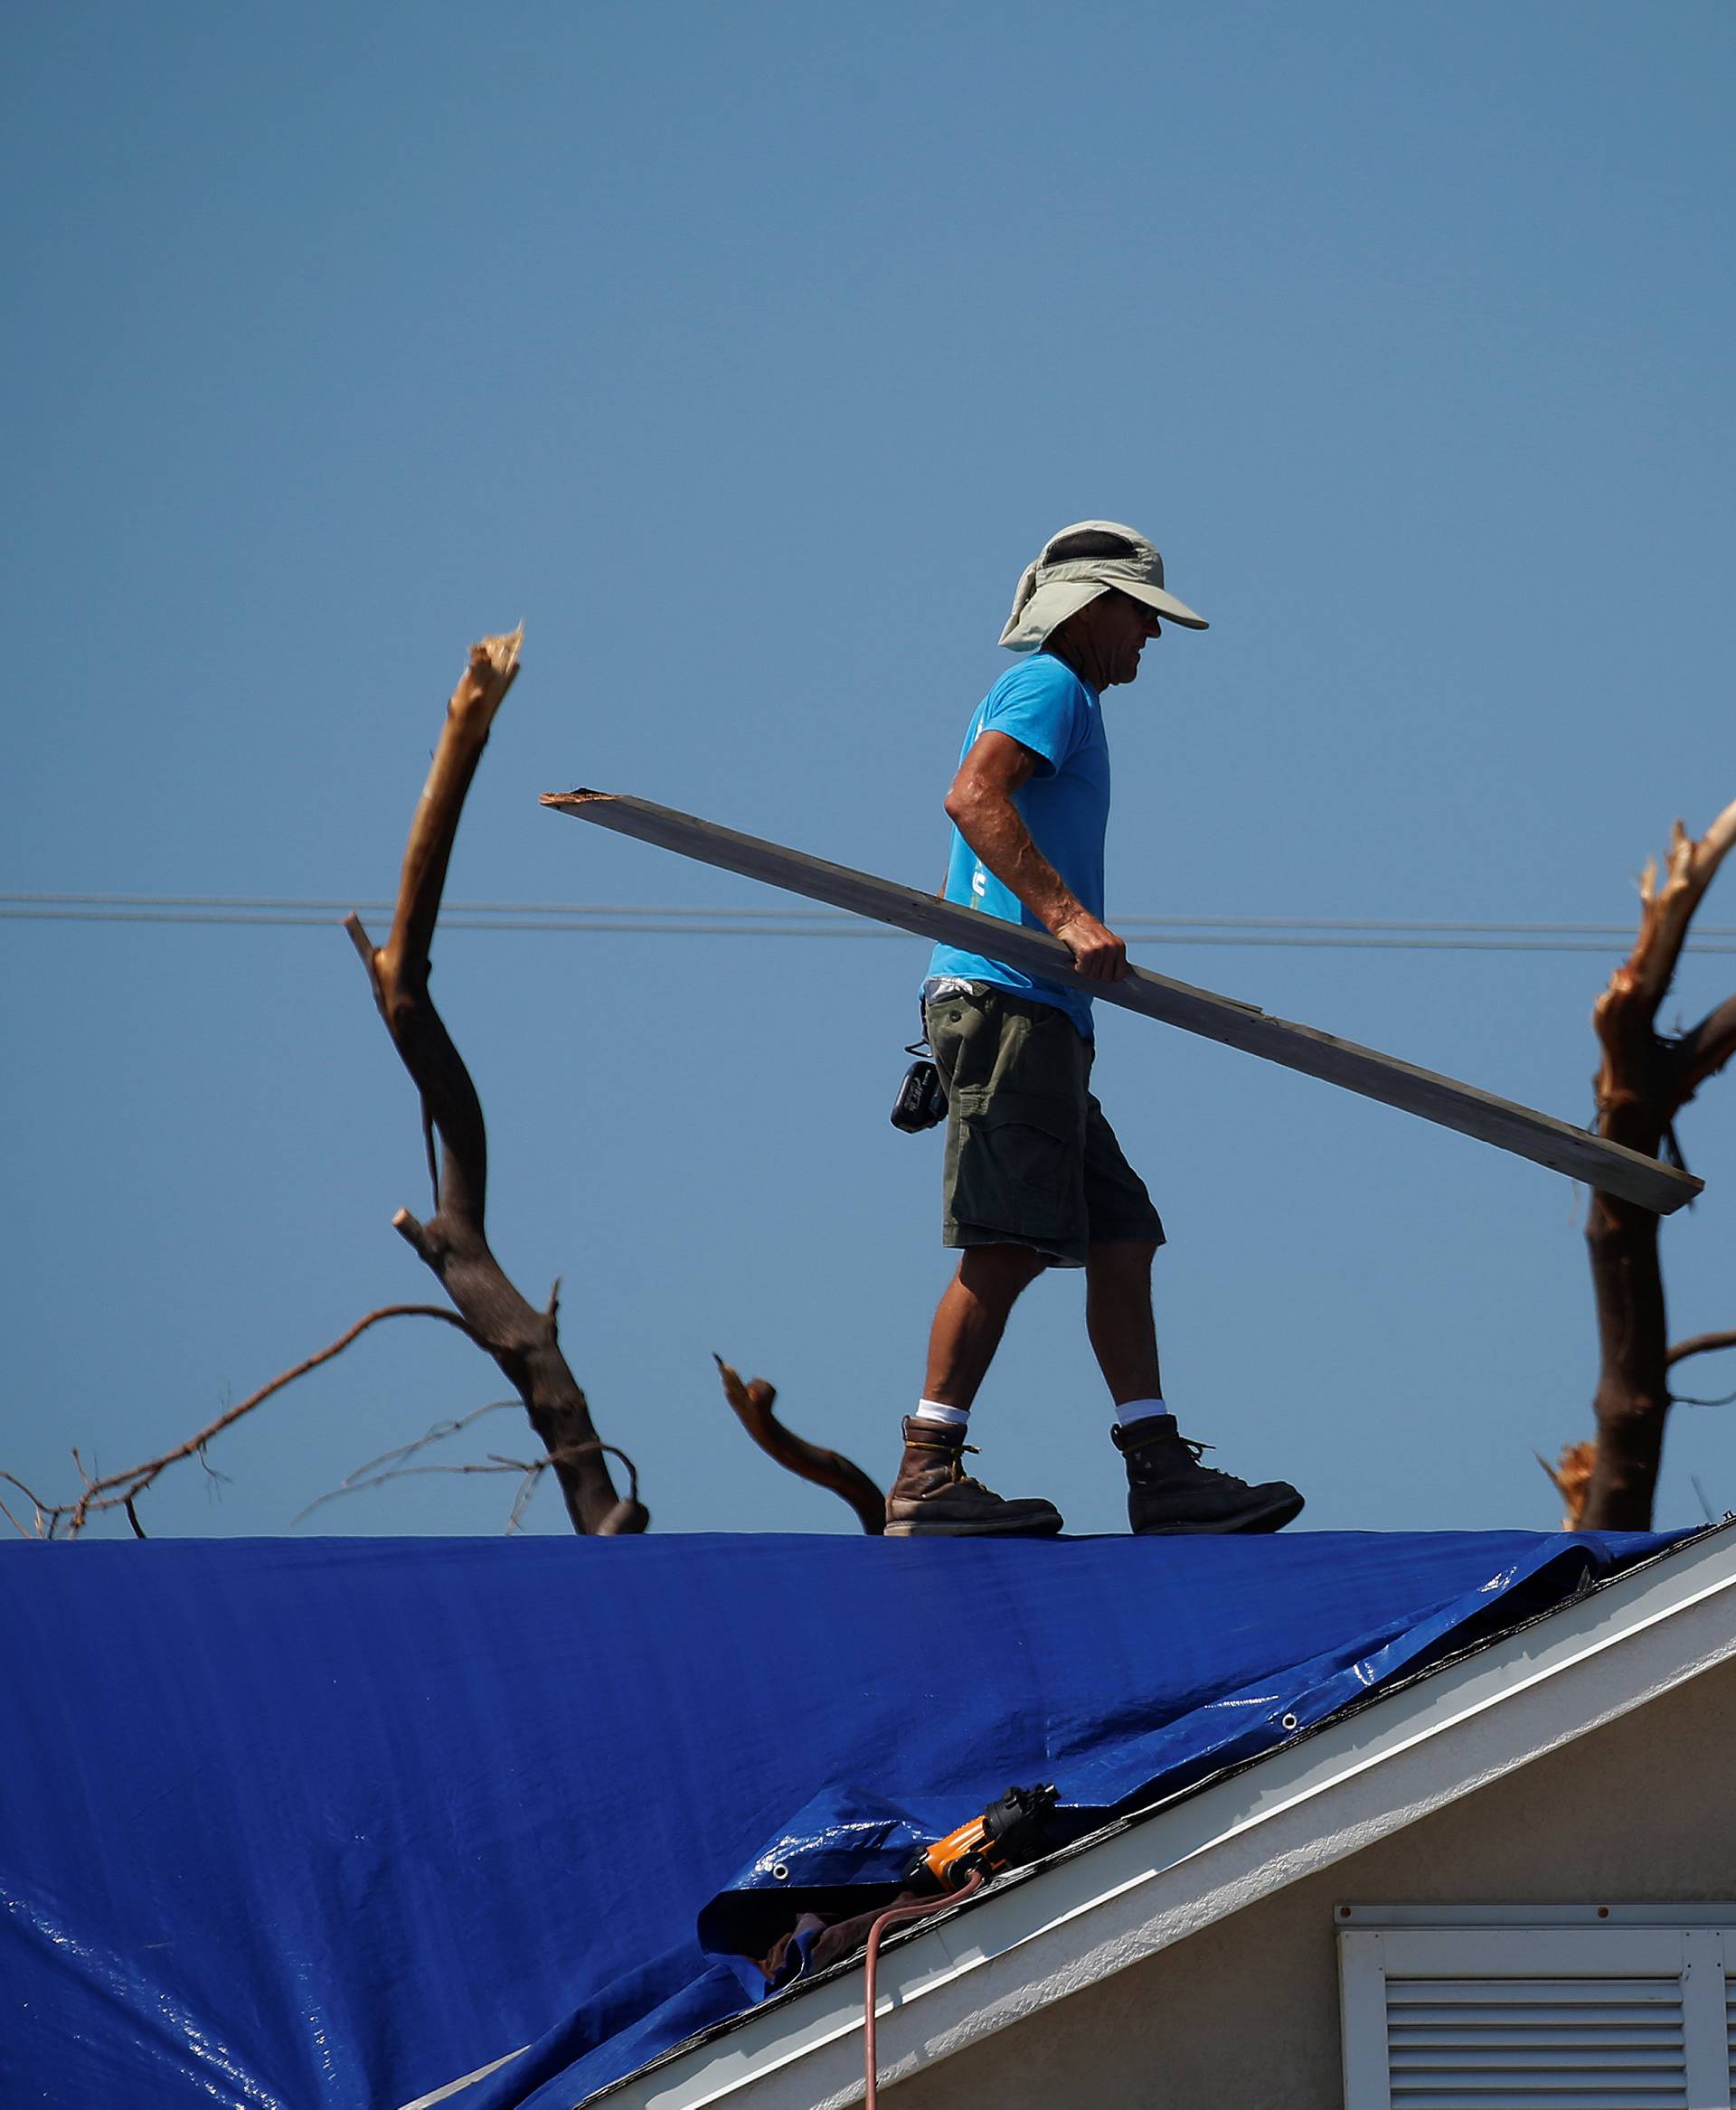 A roofer works on attaching a blue tarp to a roof following Hurricane Irma in Ramrod Key, Florida